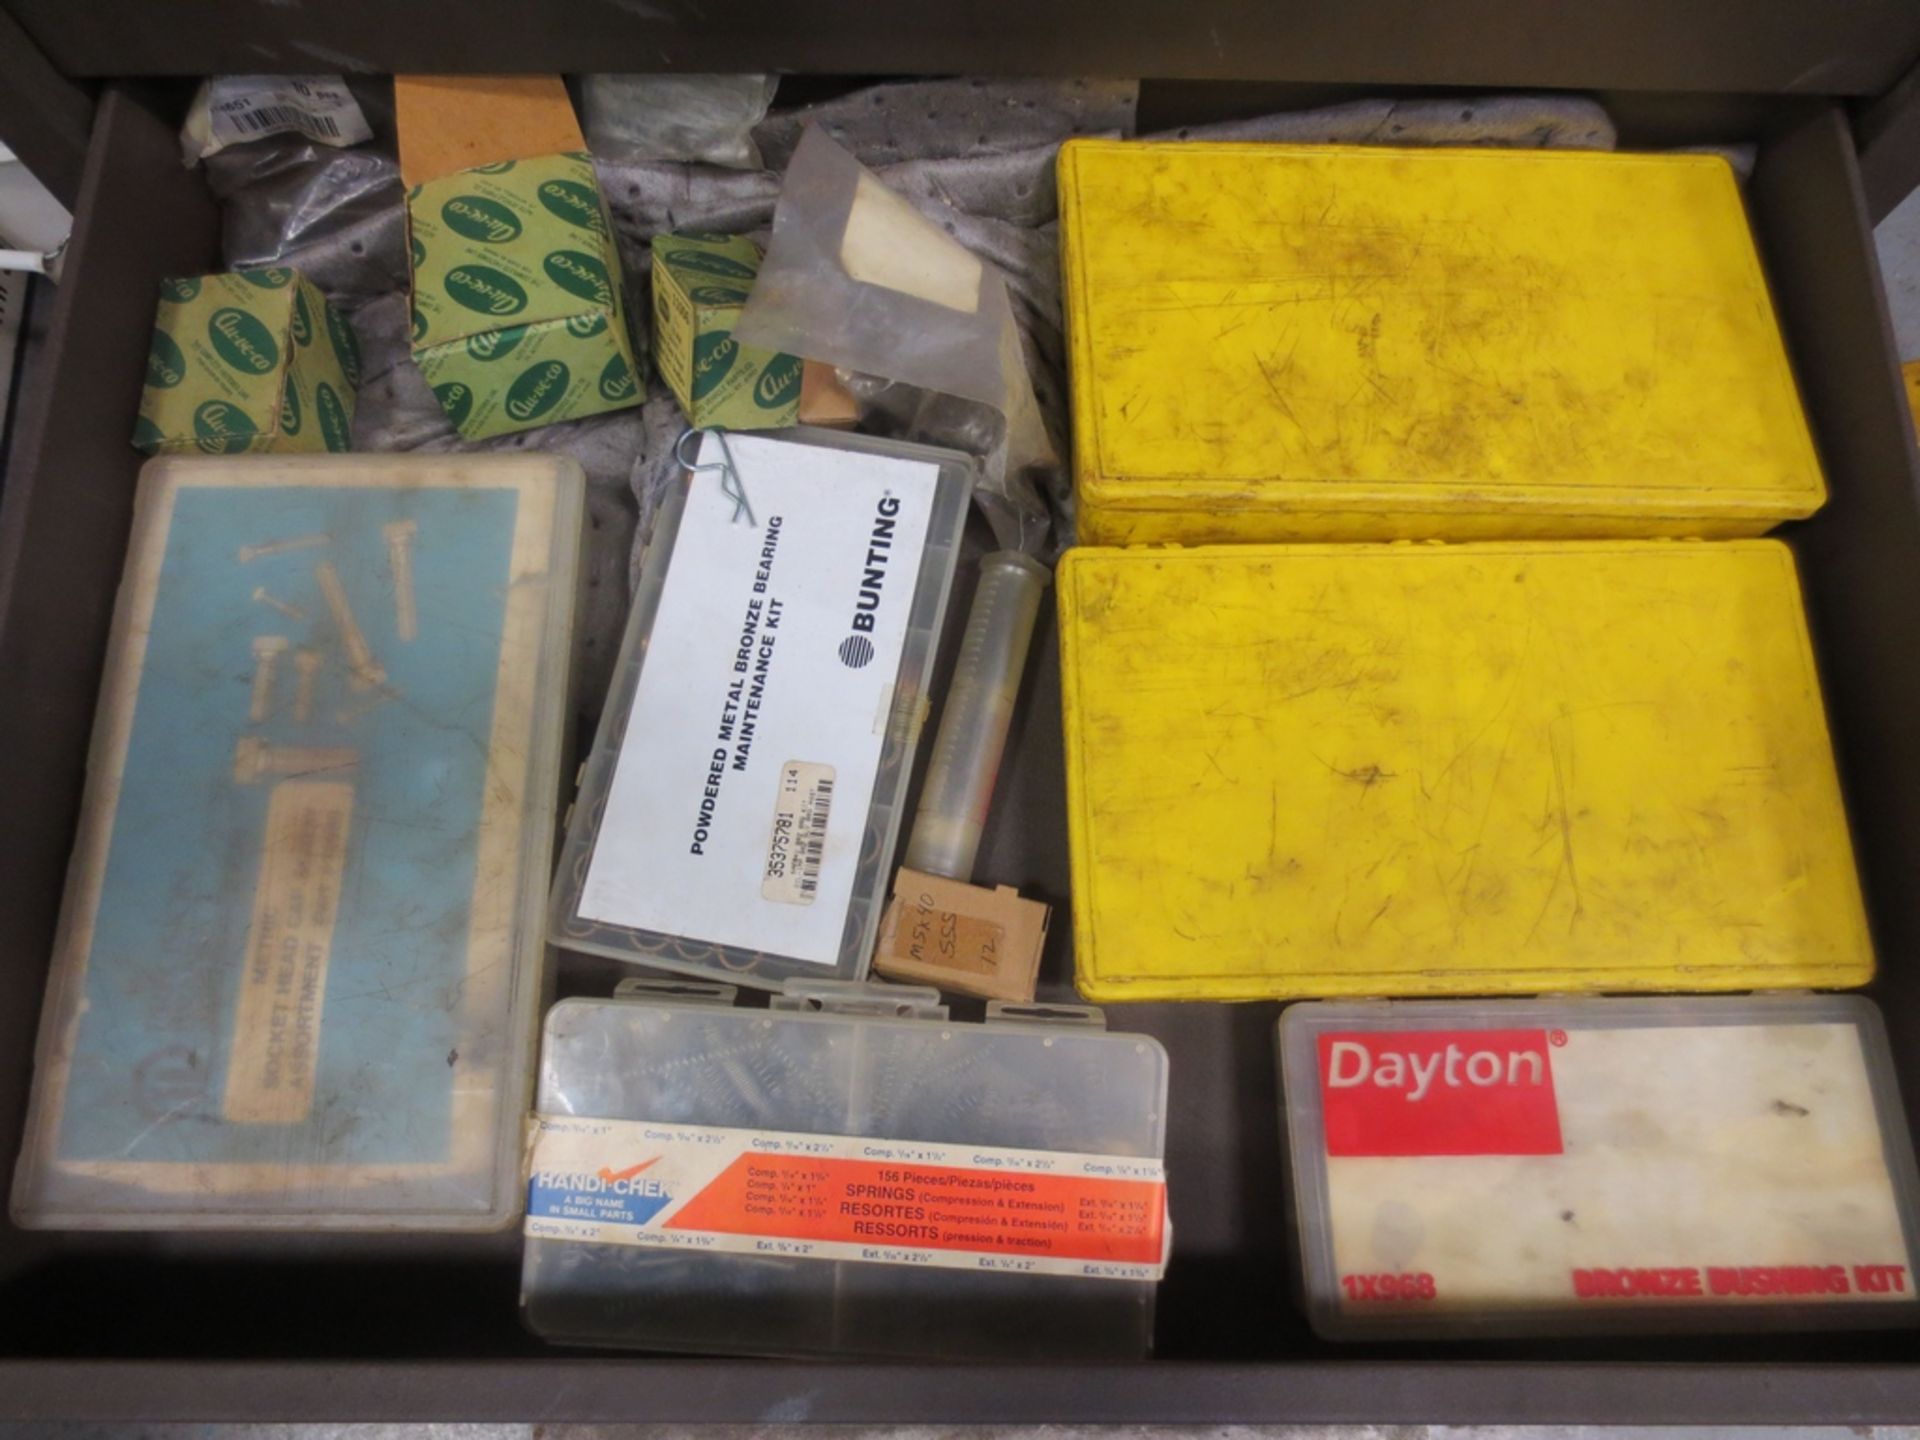 KENNEDY TOOL BOX WITH CONTENTS OF TOOLS, BOLTS, SCREWS, SEALS ETC. - Image 4 of 6